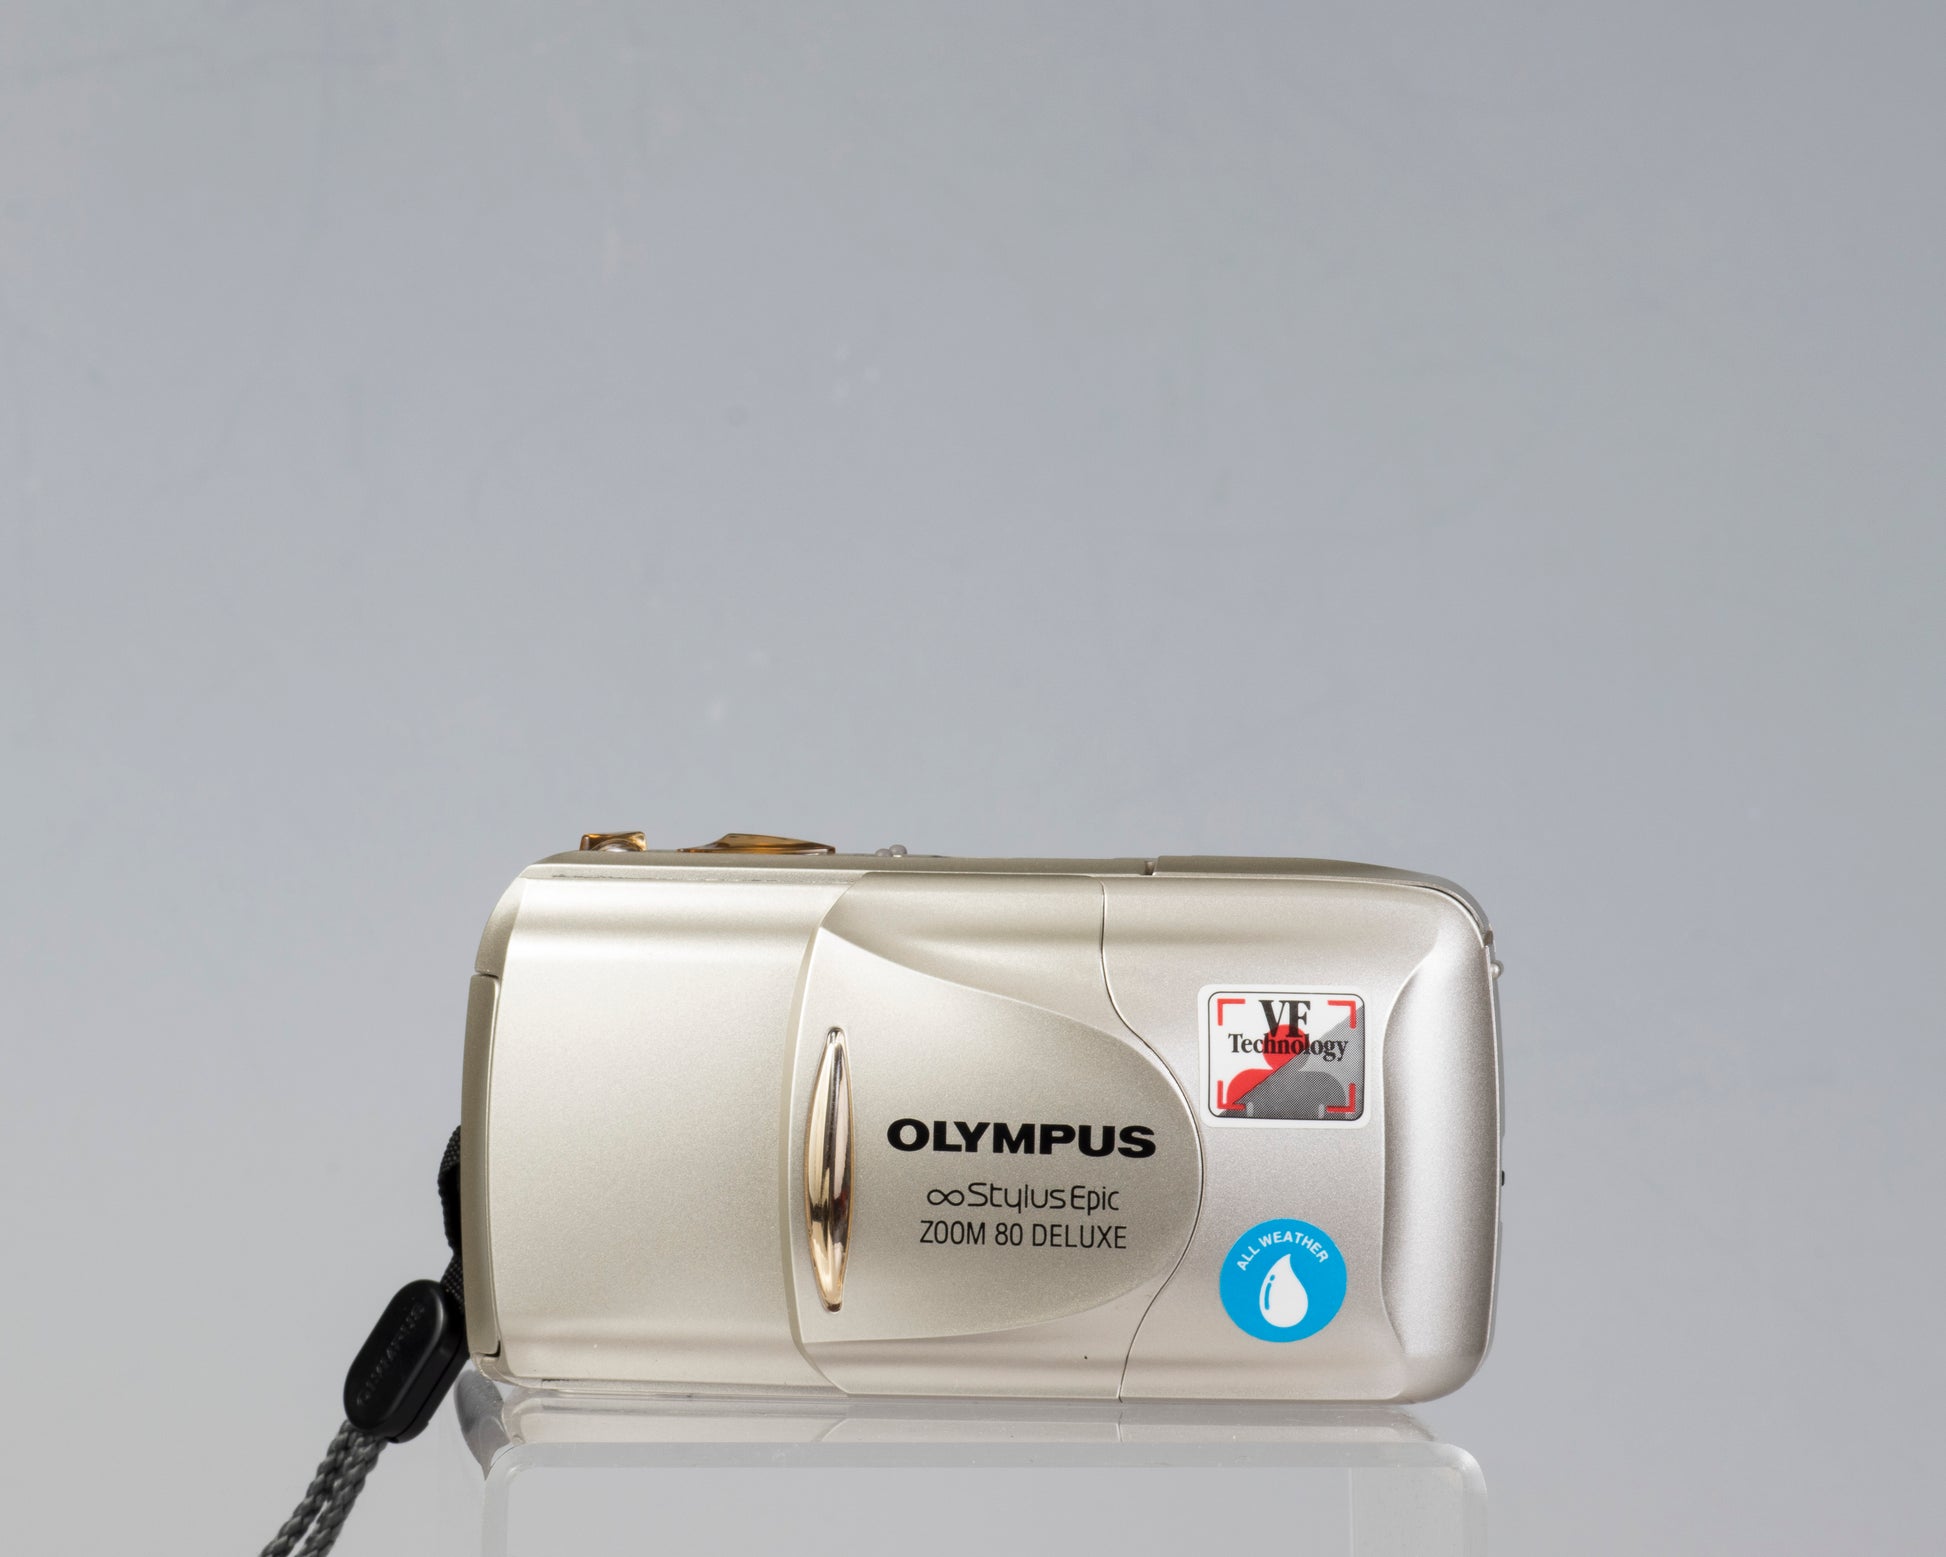 The Olympus Infinity Stylus Epic oom 80 Deluxe (shown with cover closed)